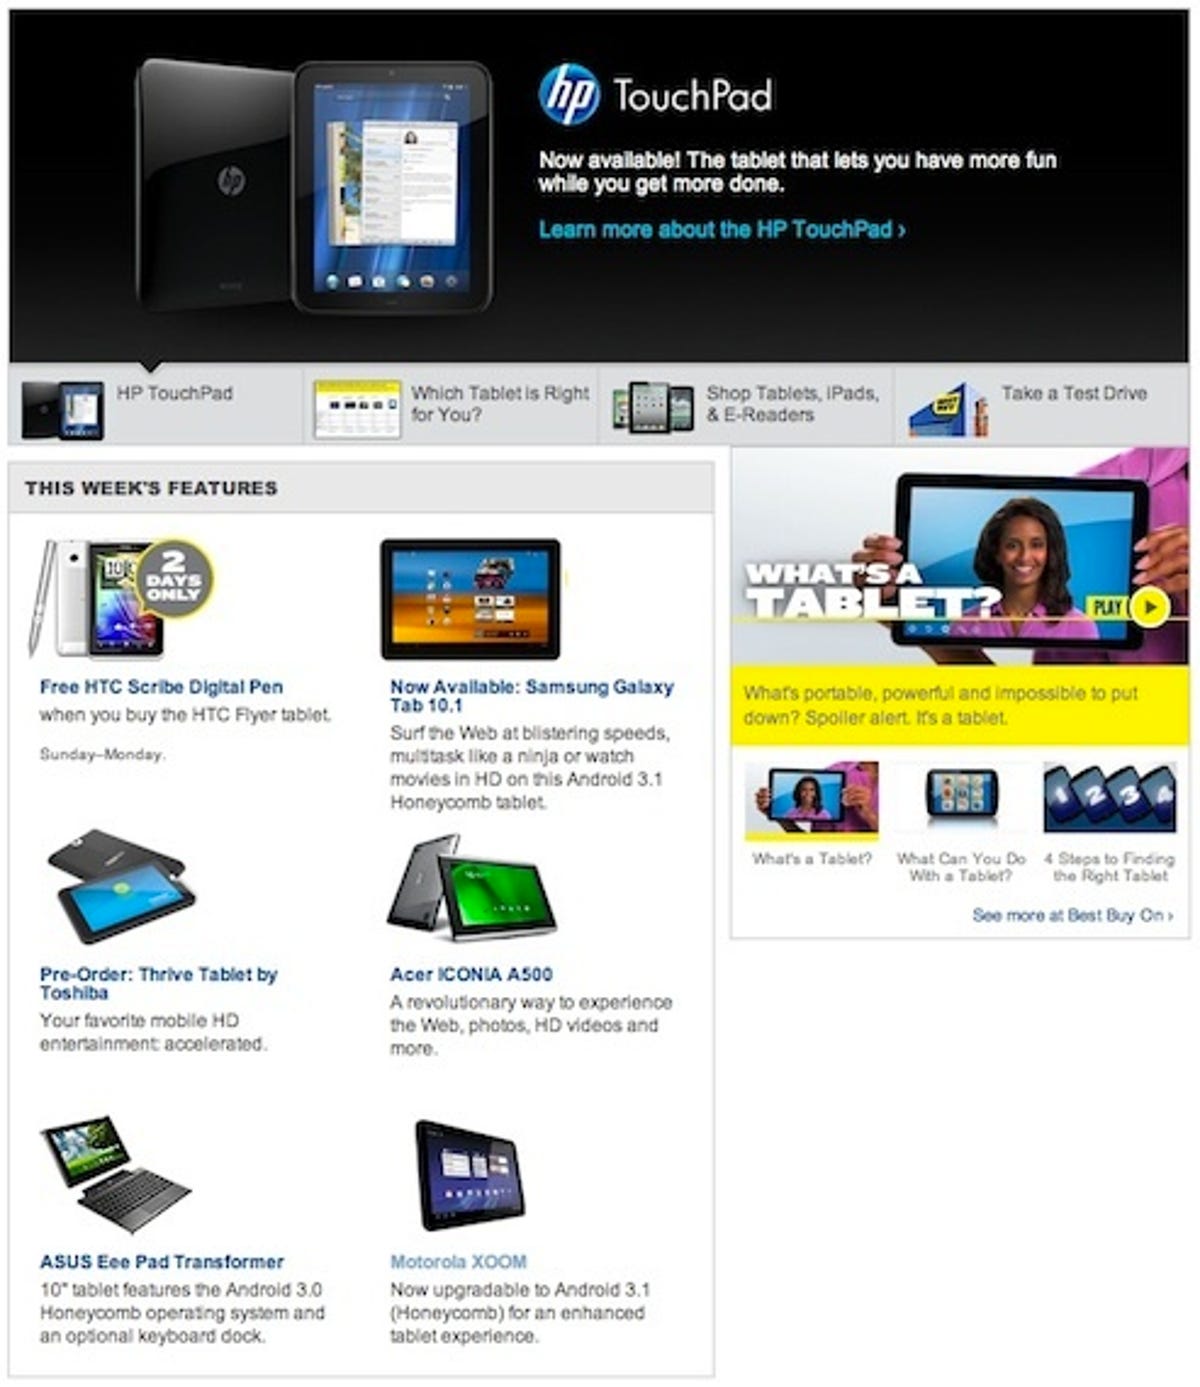 Best Buy's online home page for tablets. Mirroring its physical stores, Best Buy is now emphasizing tablet brands beyond the iPad.